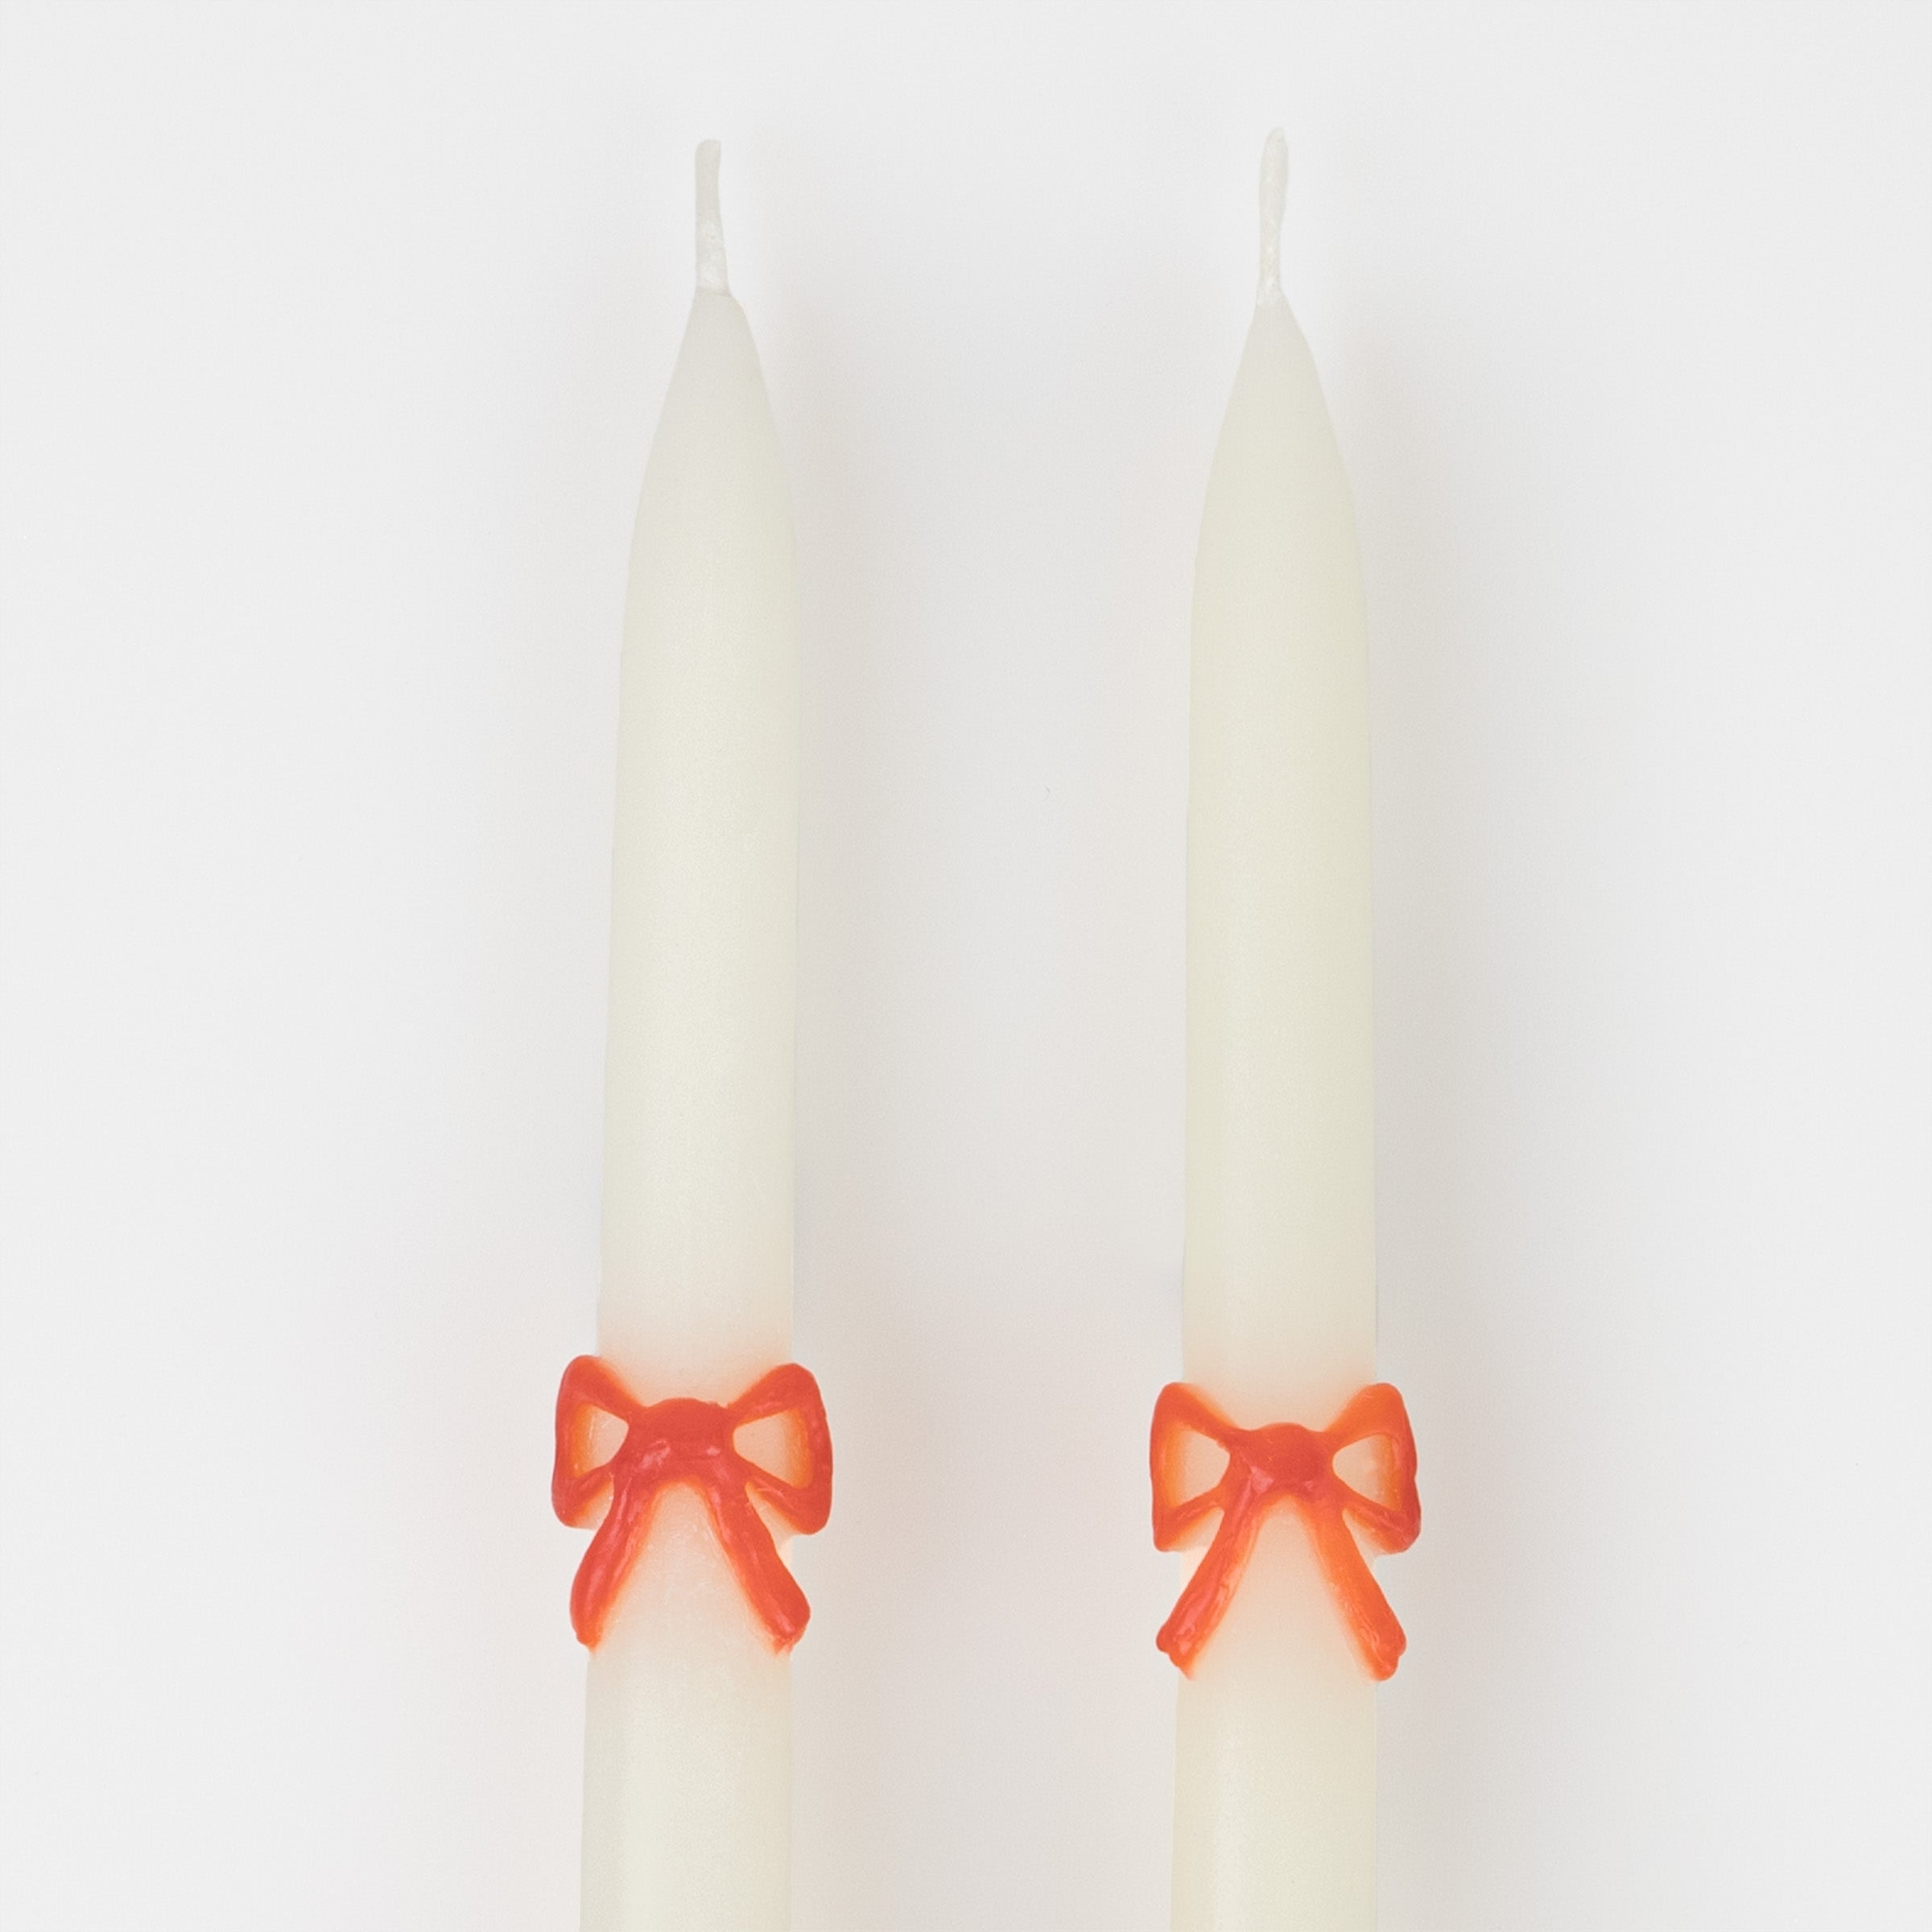 Our taper candles, with a bow design, are perfect as Christmas decorative candles.